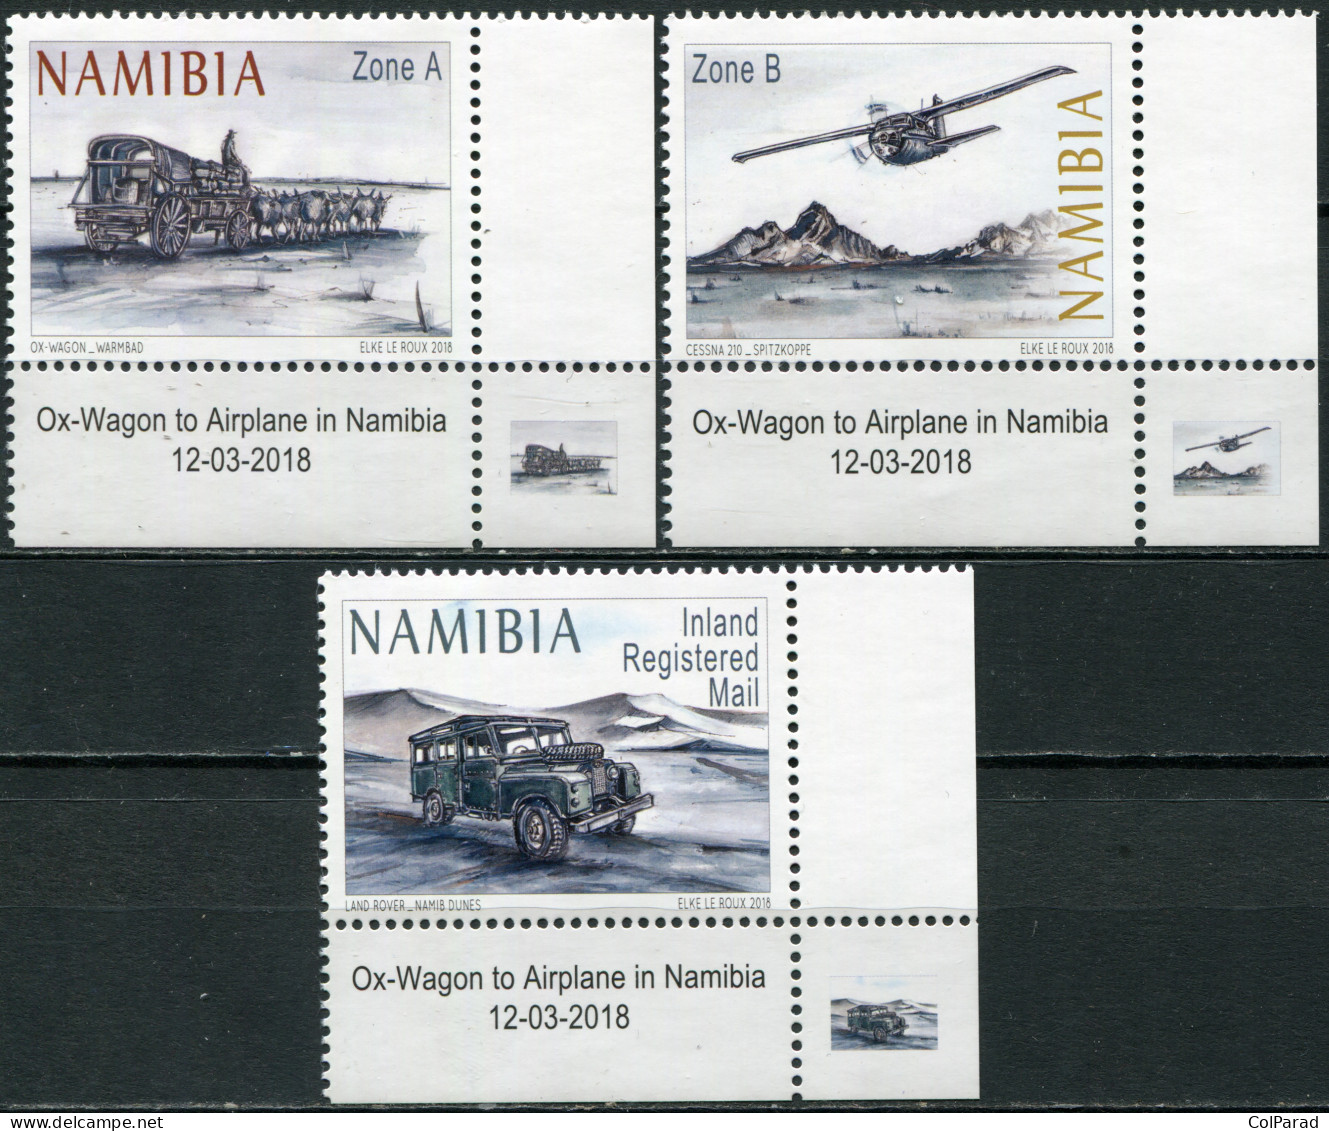 NAMIBIA - 2018 - SET OF 3 STAMPS MNH ** - Means Of Transport. C4 - Namibie (1990- ...)